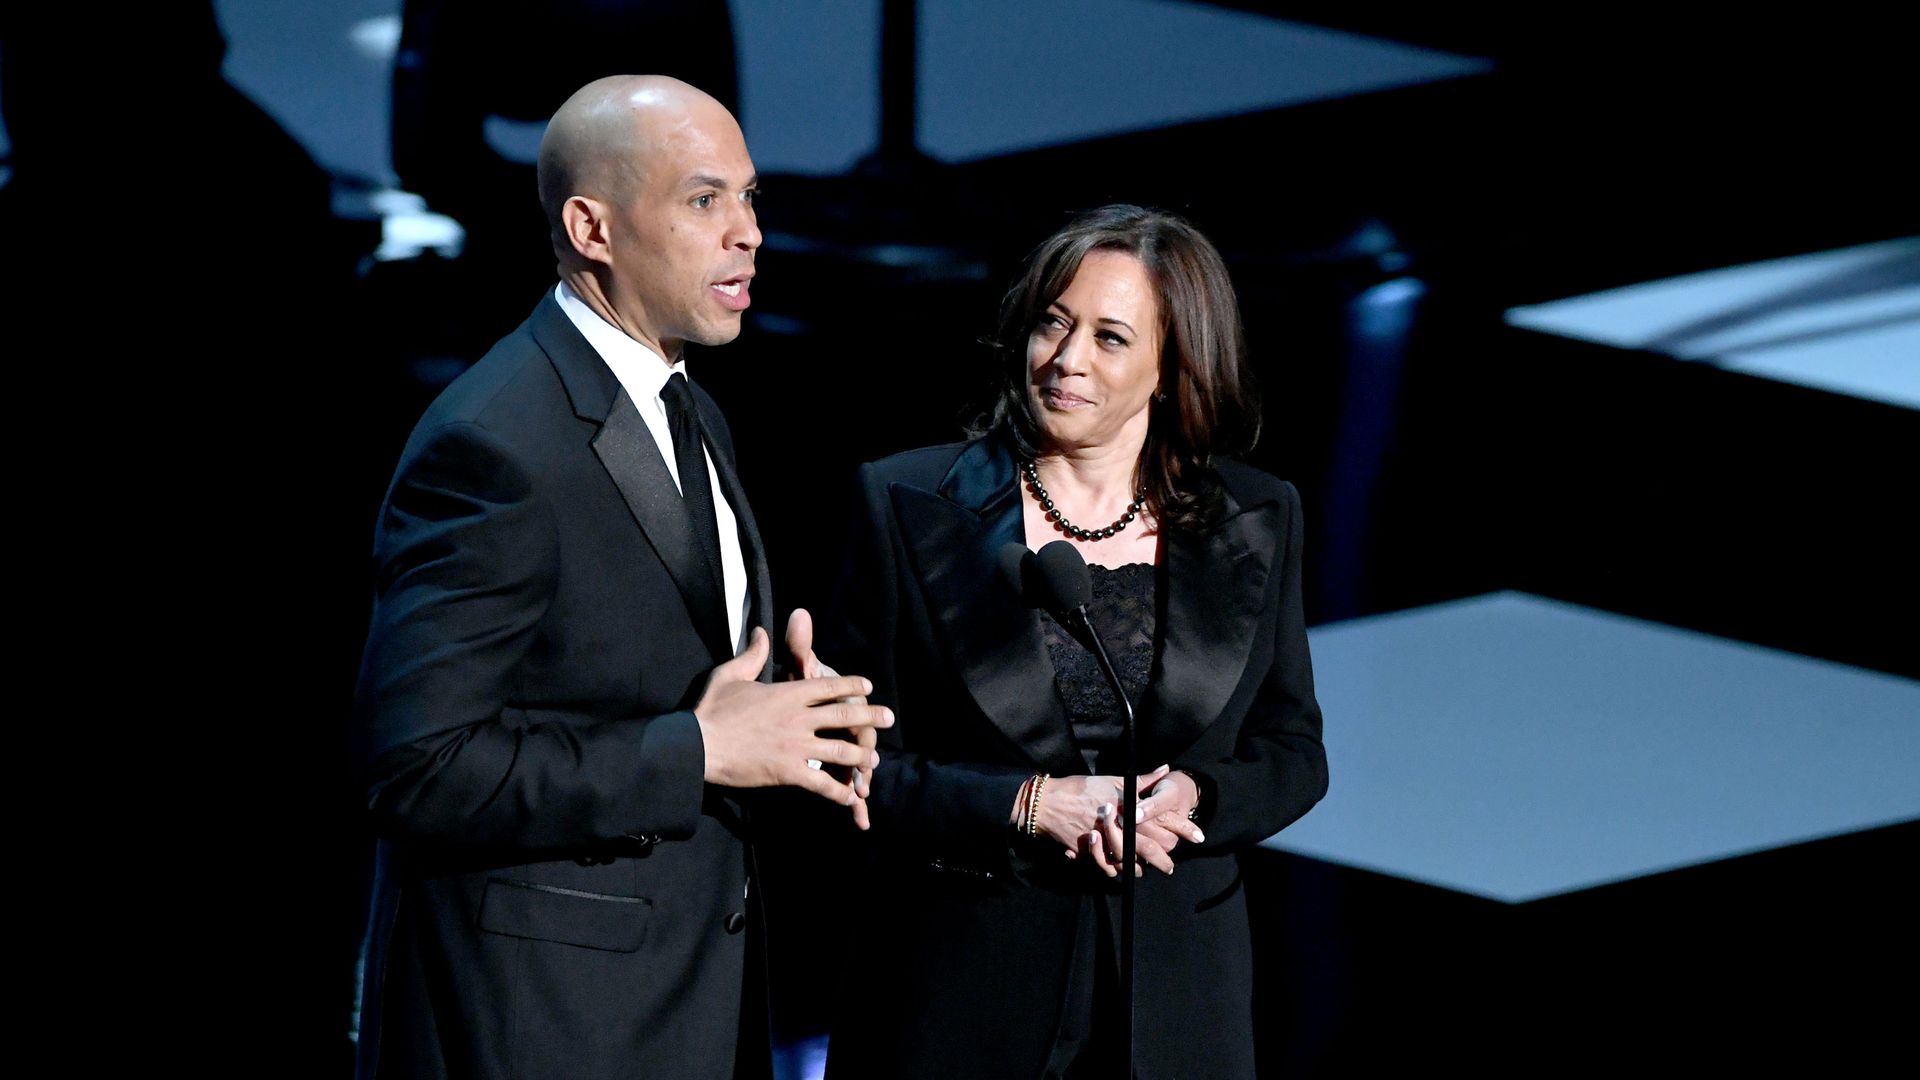 Cory Booker and Kamala Harris speak onstage at the 50th NAACP Image Awards at Dolby Theatre on March 30, 2019 in Hollywood